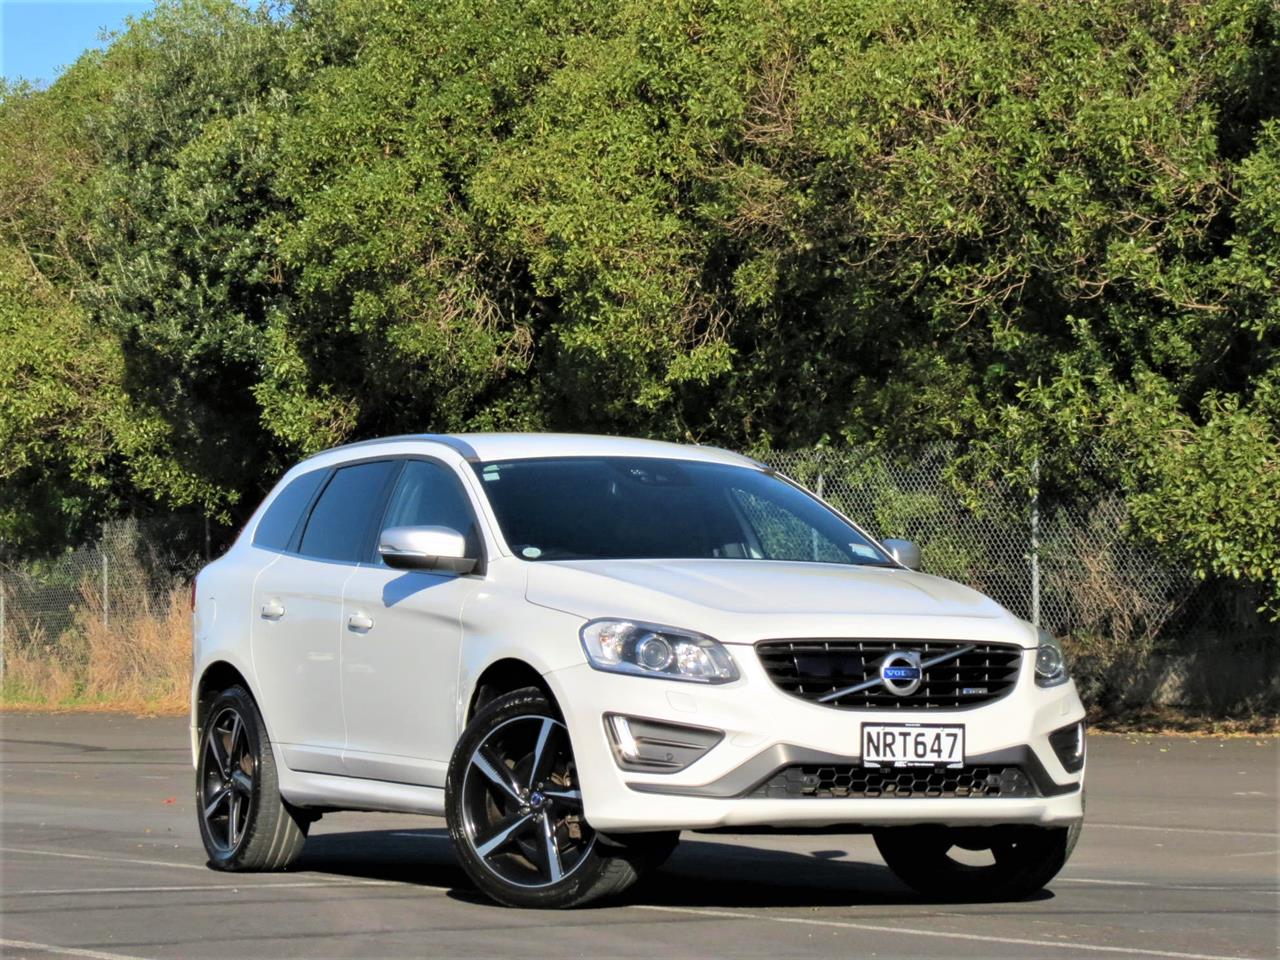 NZC 2014 Volvo XC60 just arrived to Auckland